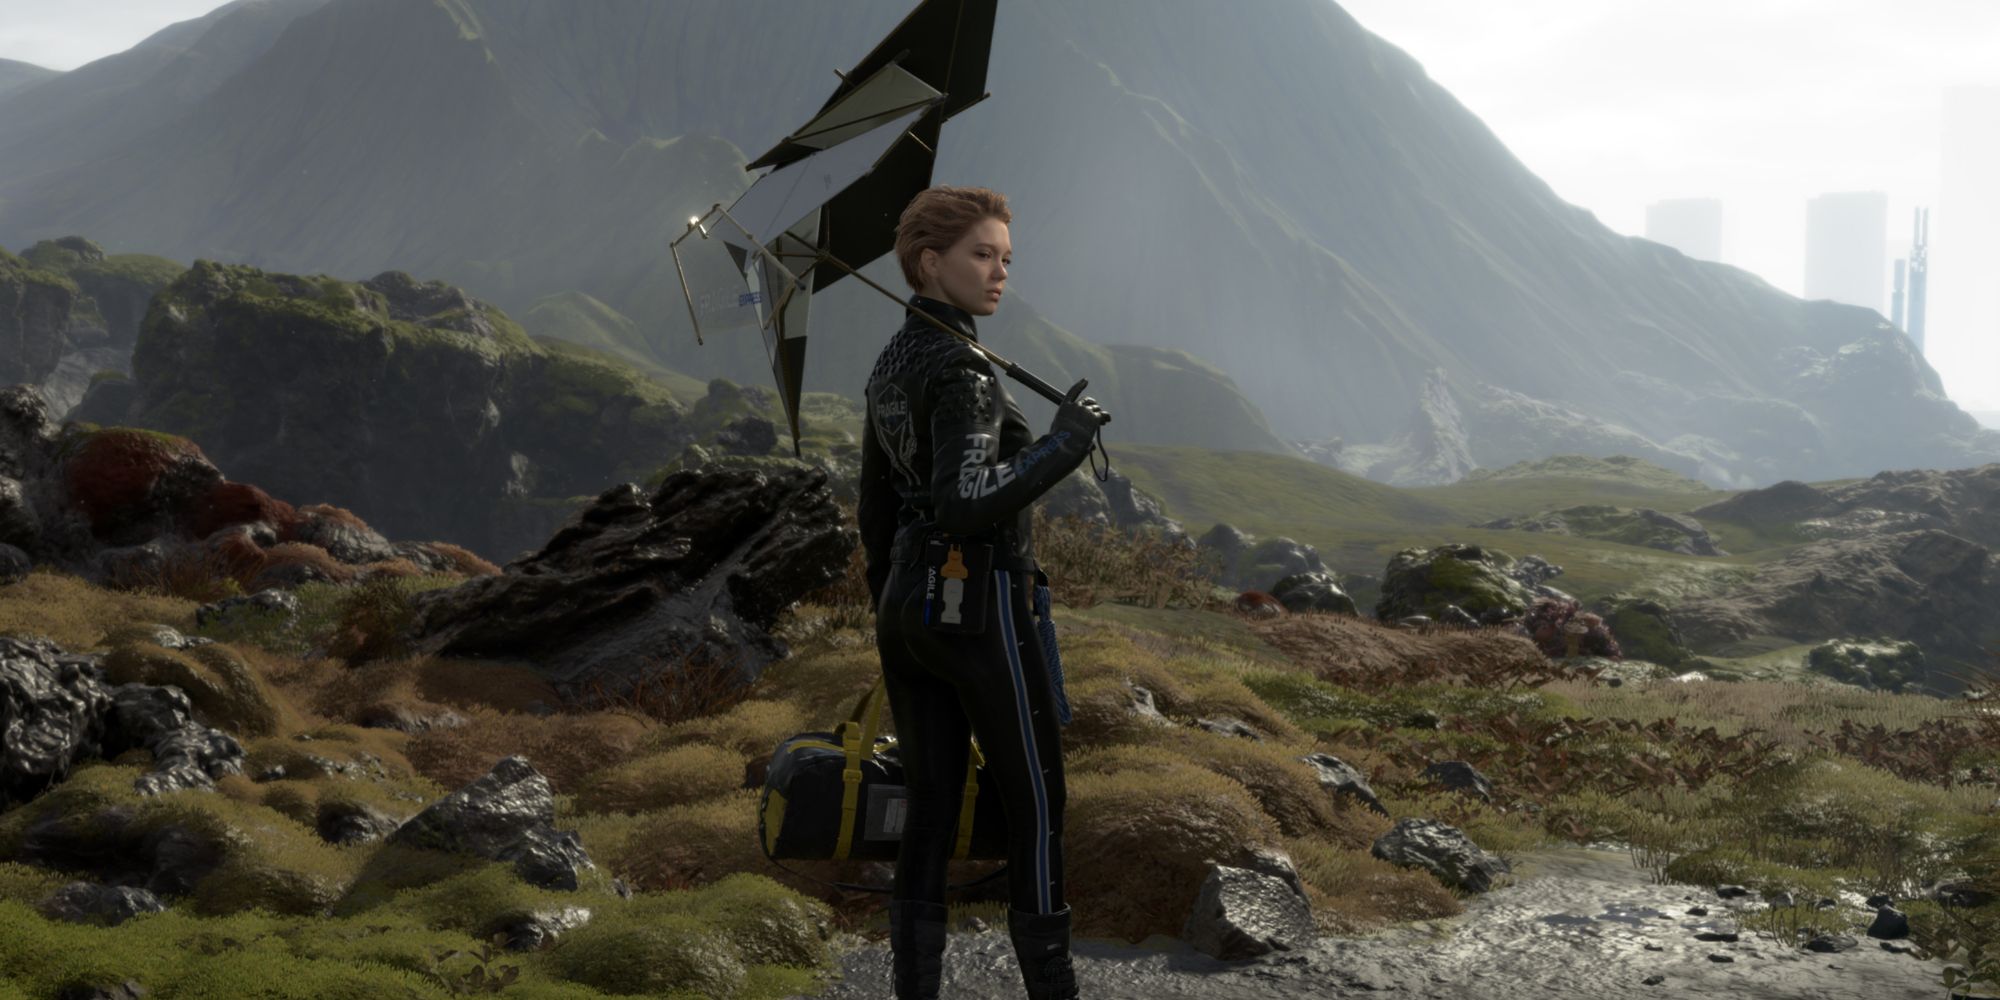 Death Stranding (unofficially) features the longest cutscene ever in a video game